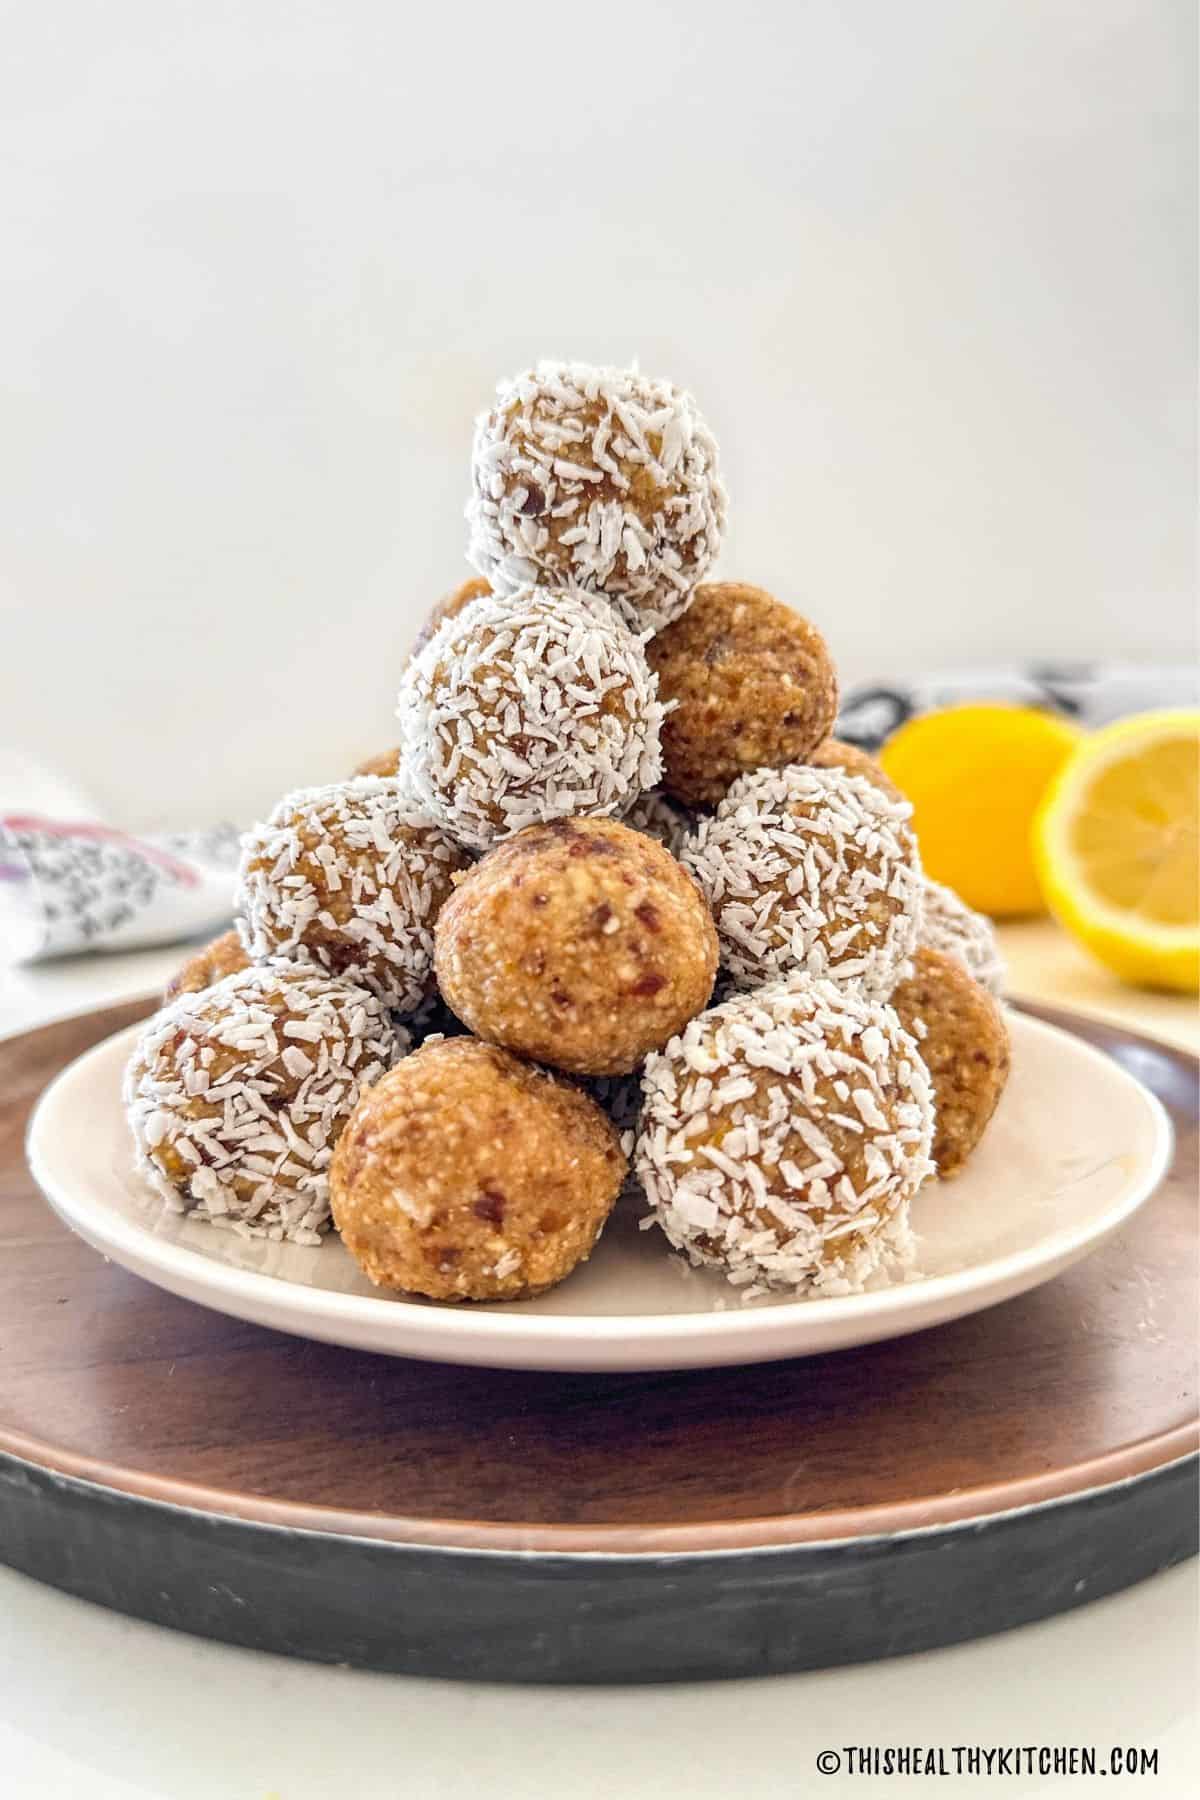 Lemon bliss balls stacked in a pyramid shape on white plate.